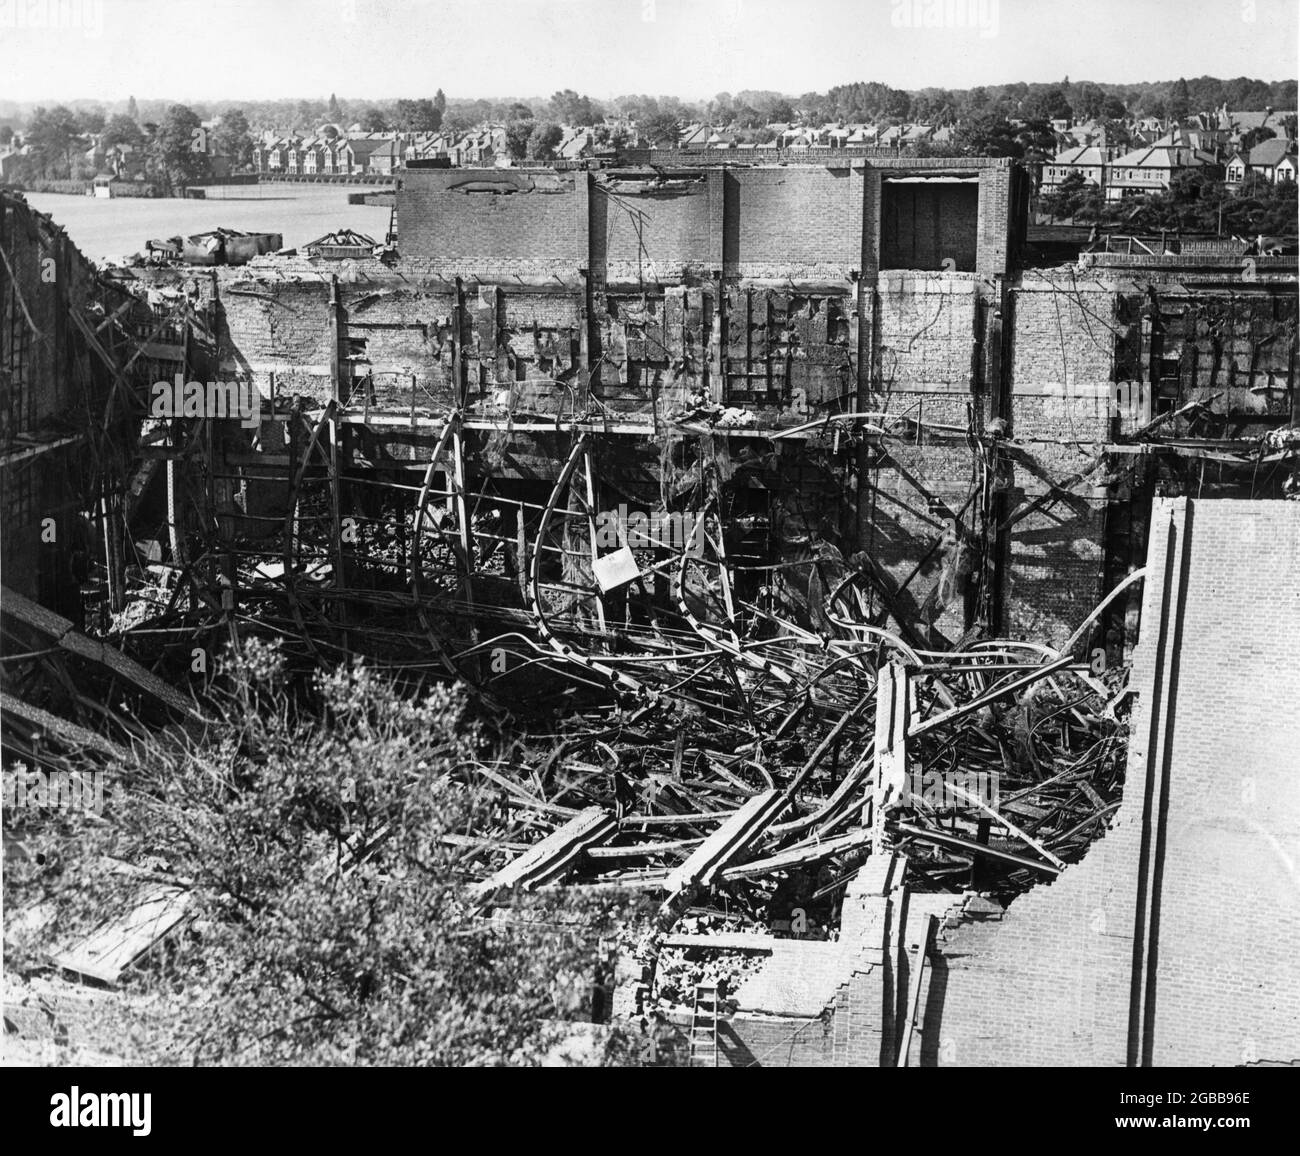 Bomb Damaged WARNER BROTHERS - FIRST NATIONAL TEDDINGTON FILM STUDIOS in England following V2 Rocket Attack in July 1944 Stock Photo